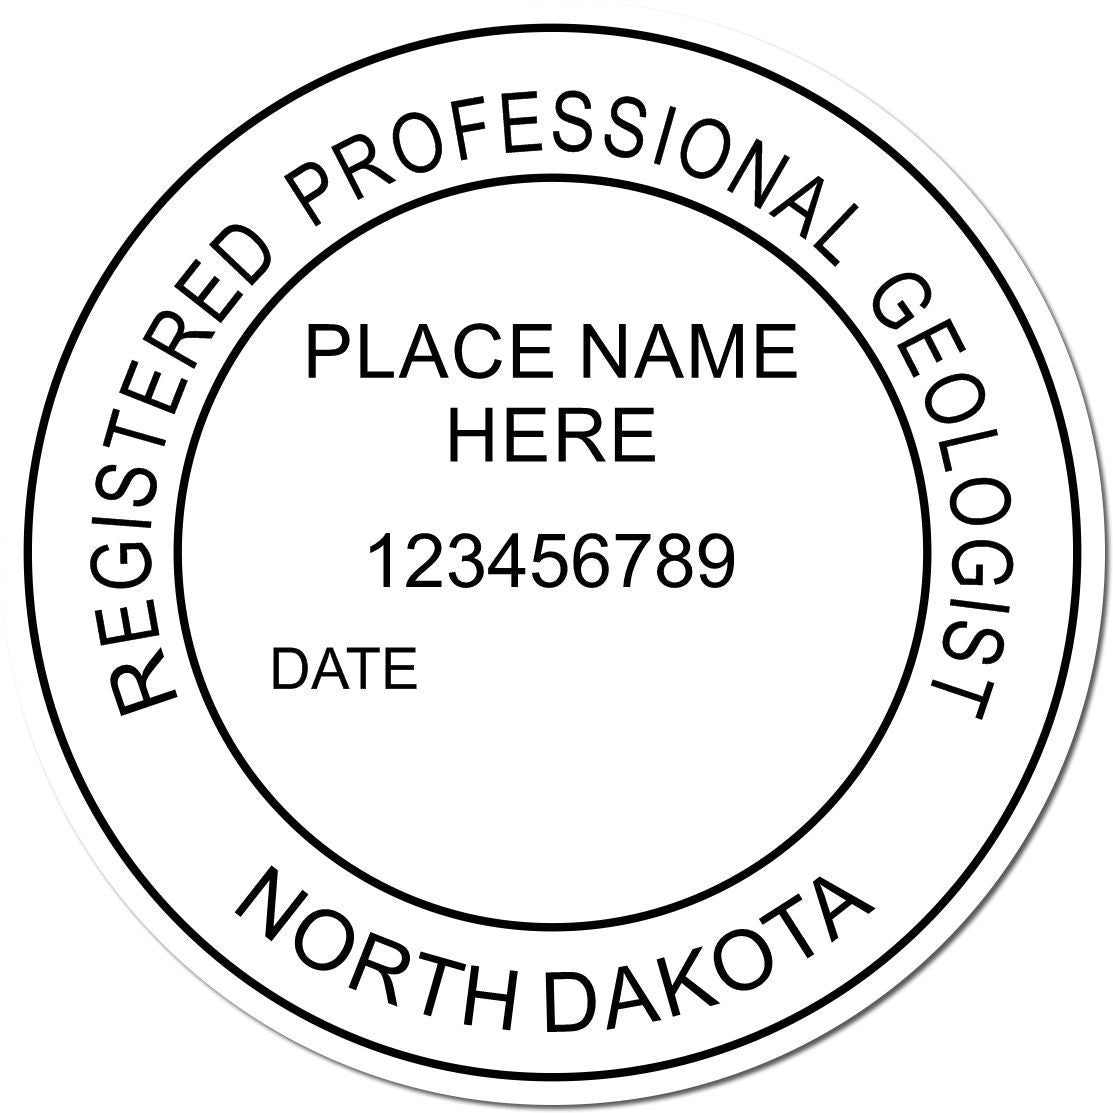 This paper is stamped with a sample imprint of the North Dakota Professional Geologist Seal Stamp, signifying its quality and reliability.